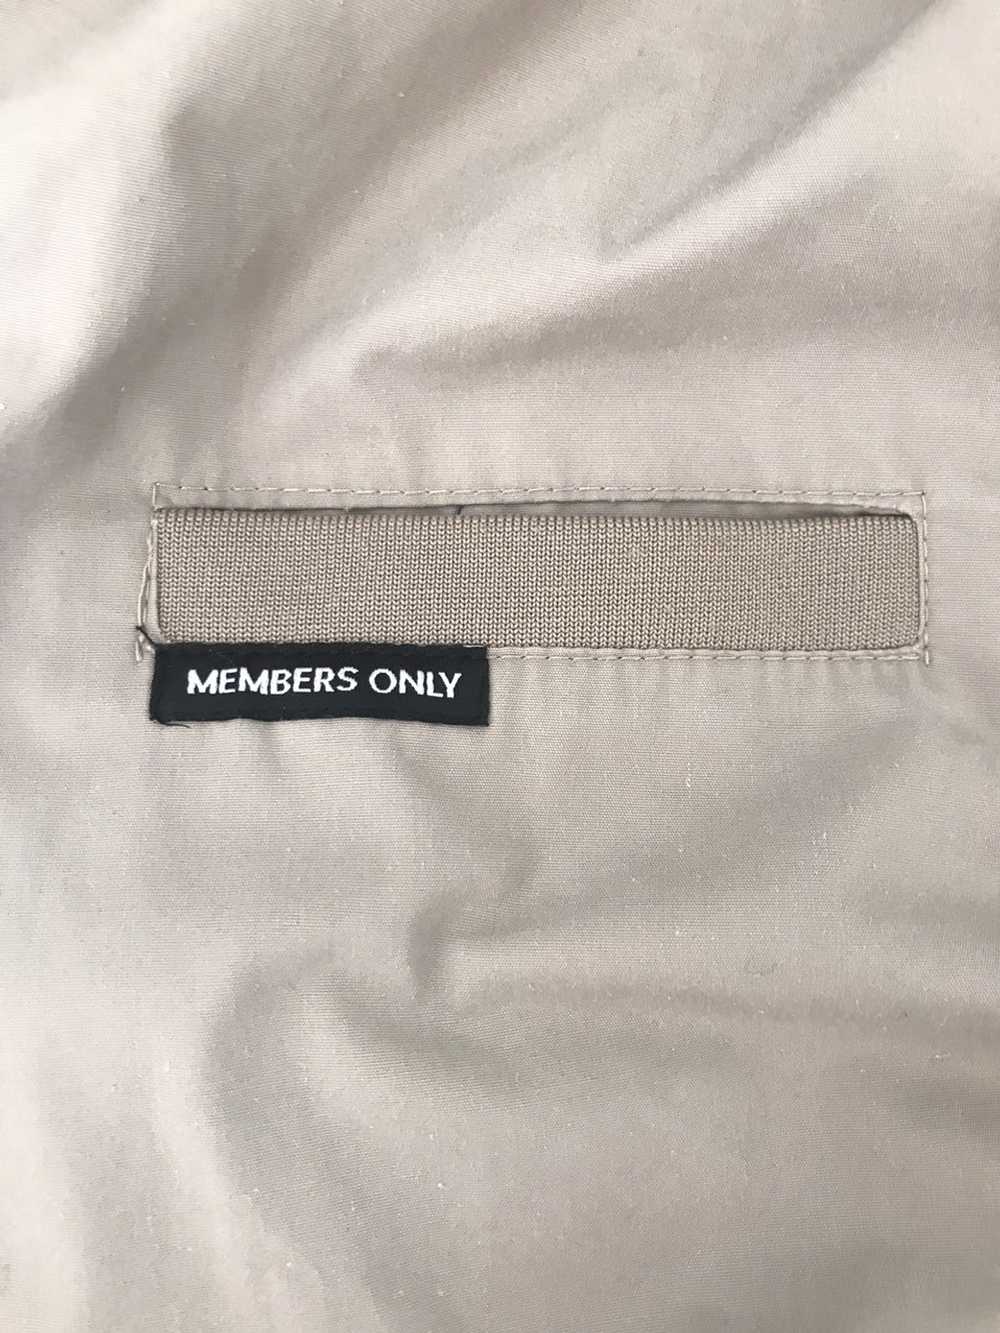 Members Only MEMBERS ONLY ICONIC RACER JACKET - image 4